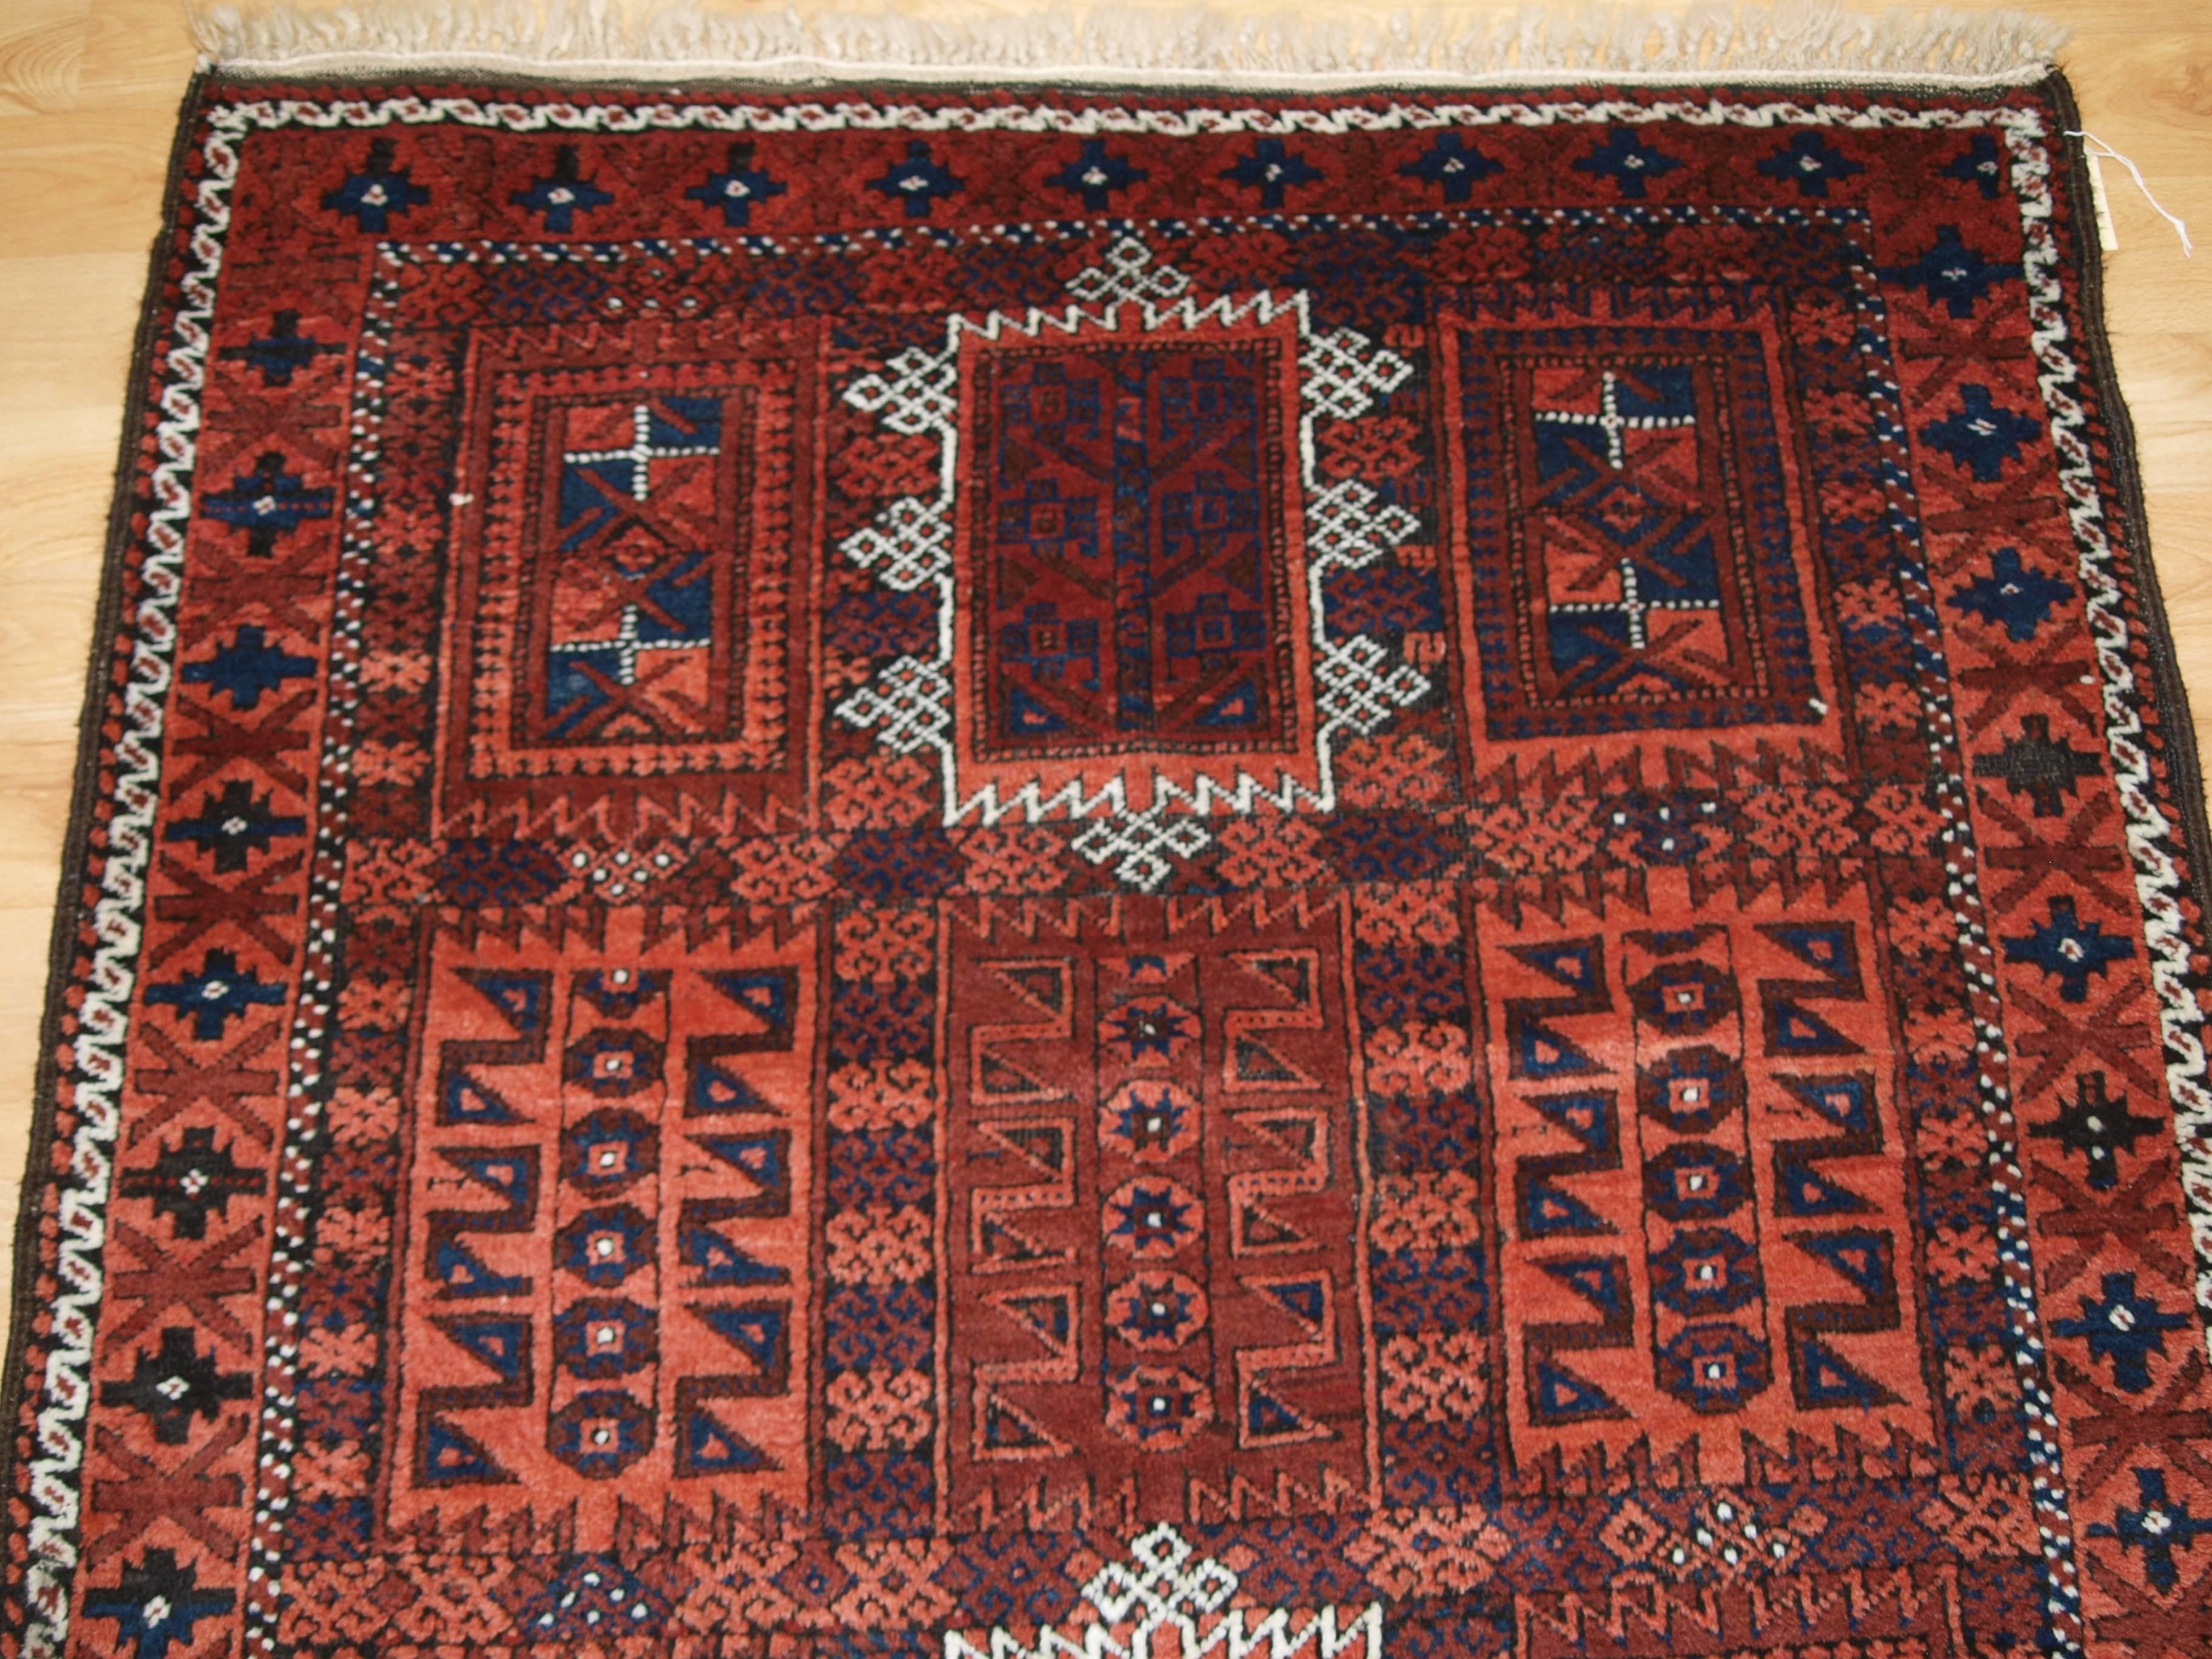 Antique Baluch Rug with Traditional Timuri or Yaquab Khani Design, circa 1900 In Excellent Condition For Sale In Moreton-in-Marsh, GB